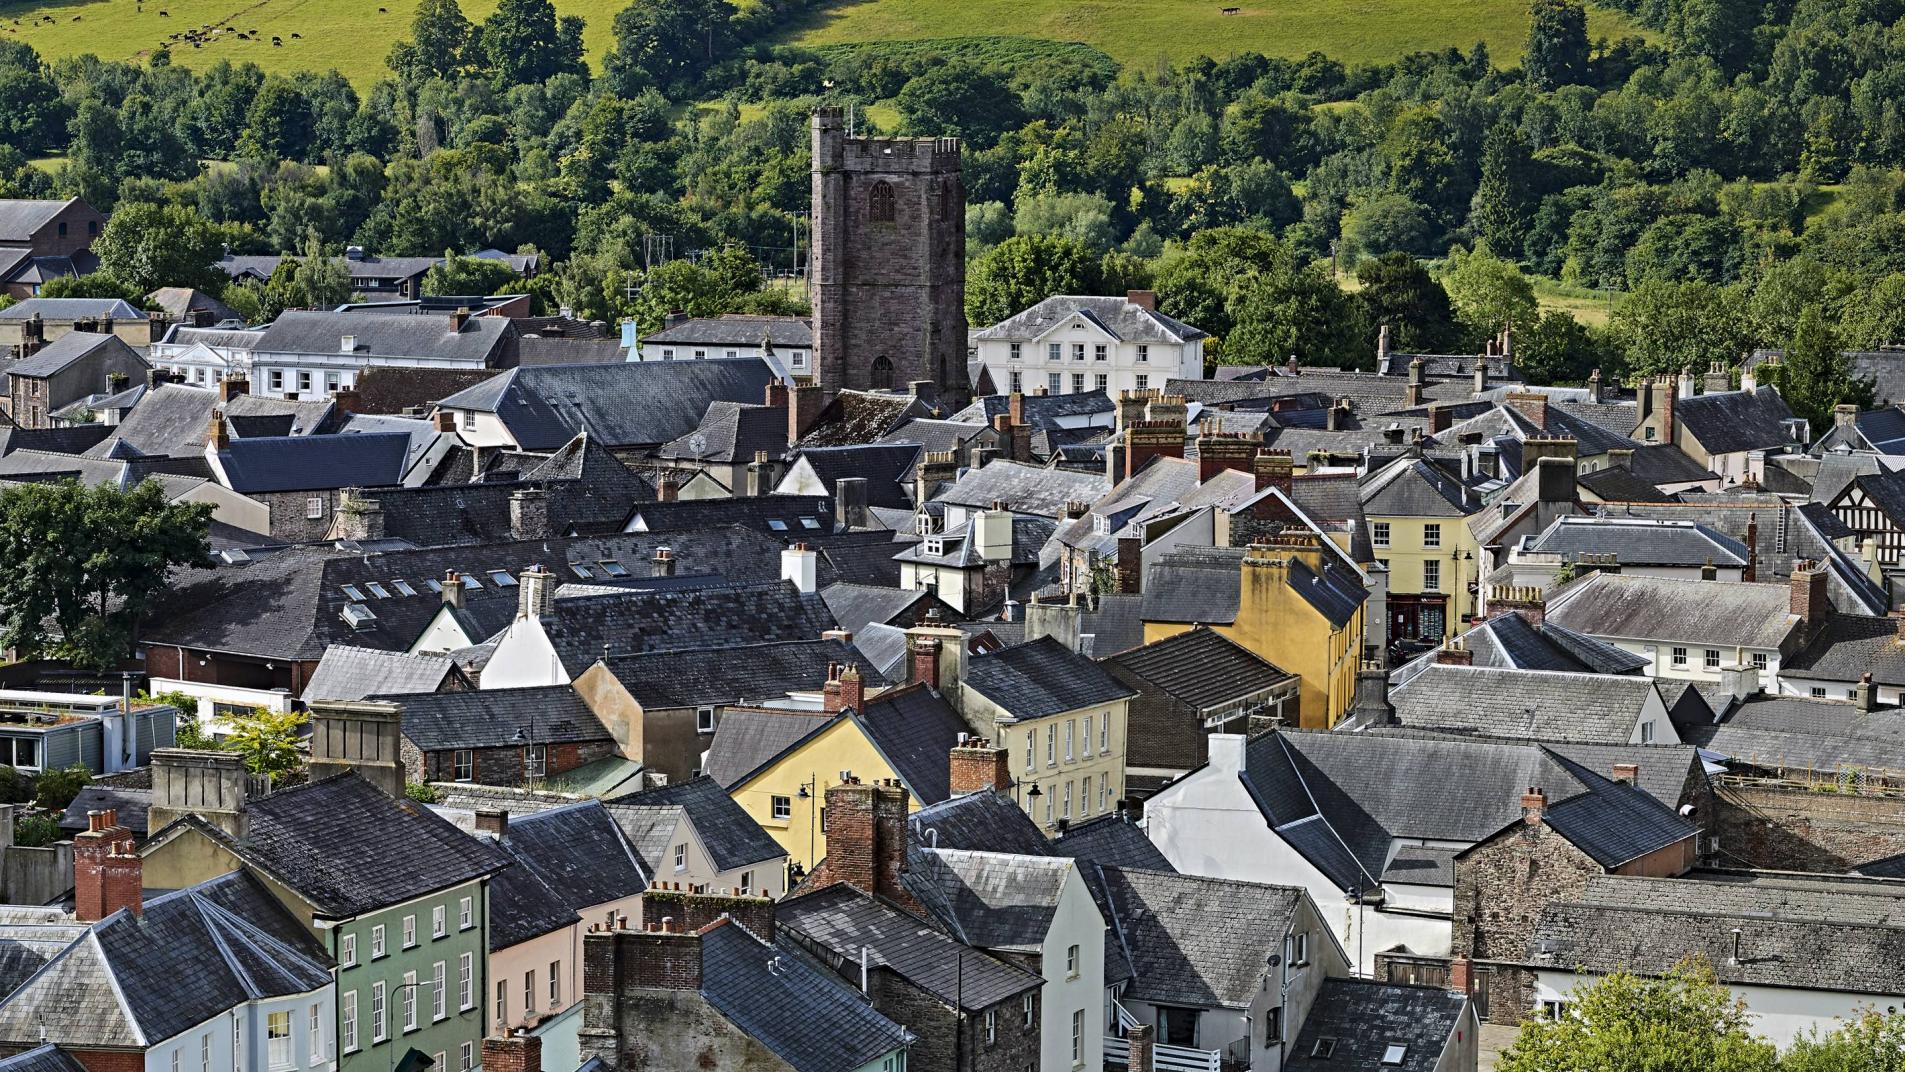 Discover Brecon's history and culture in this aerial shot of the town